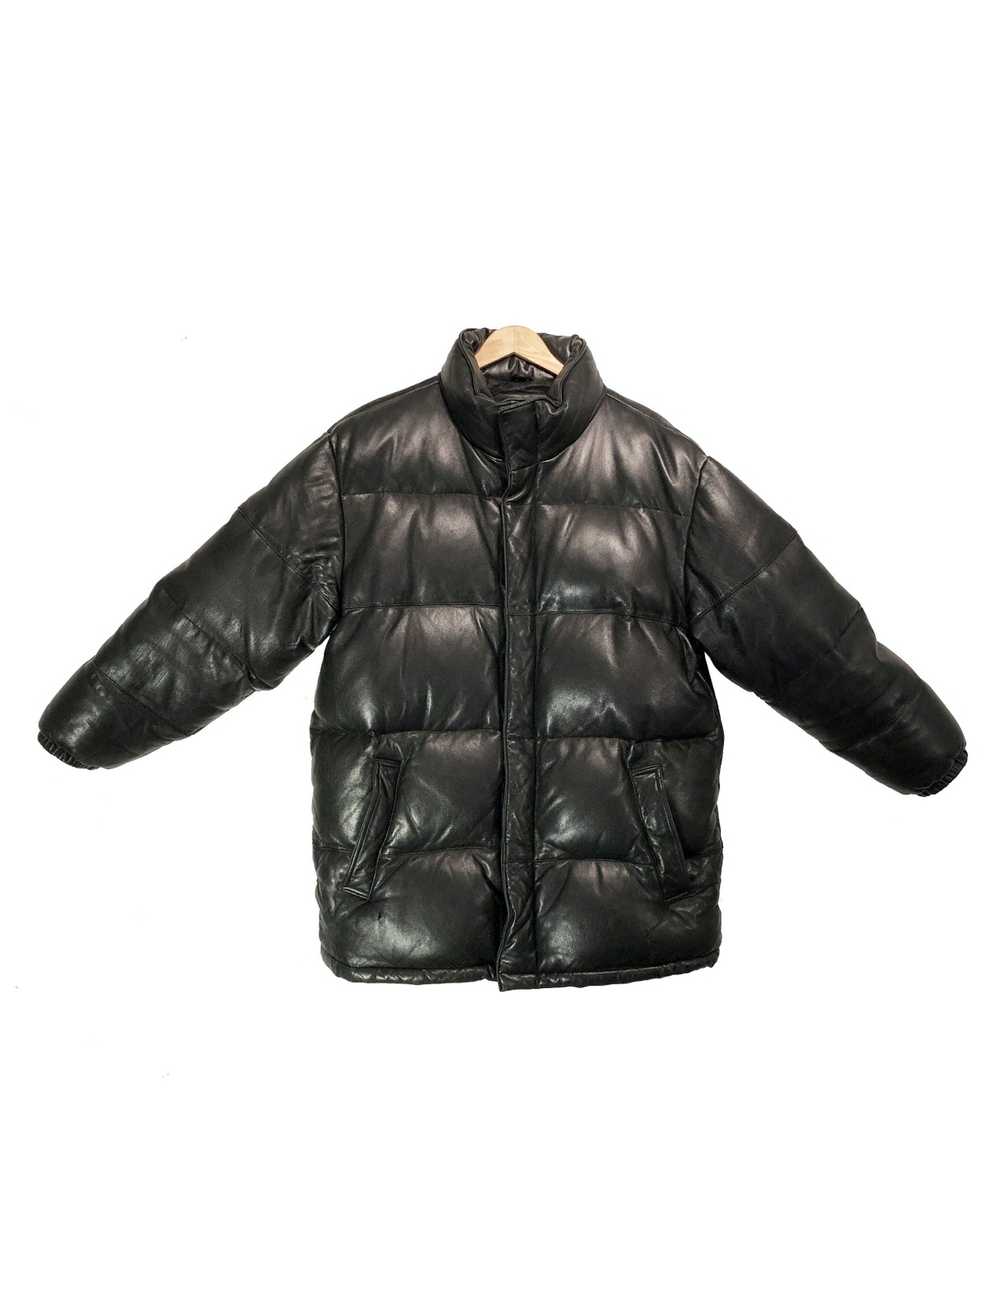 Stussy Archive Stussy Leather Down/Puffer Jacket - image 1